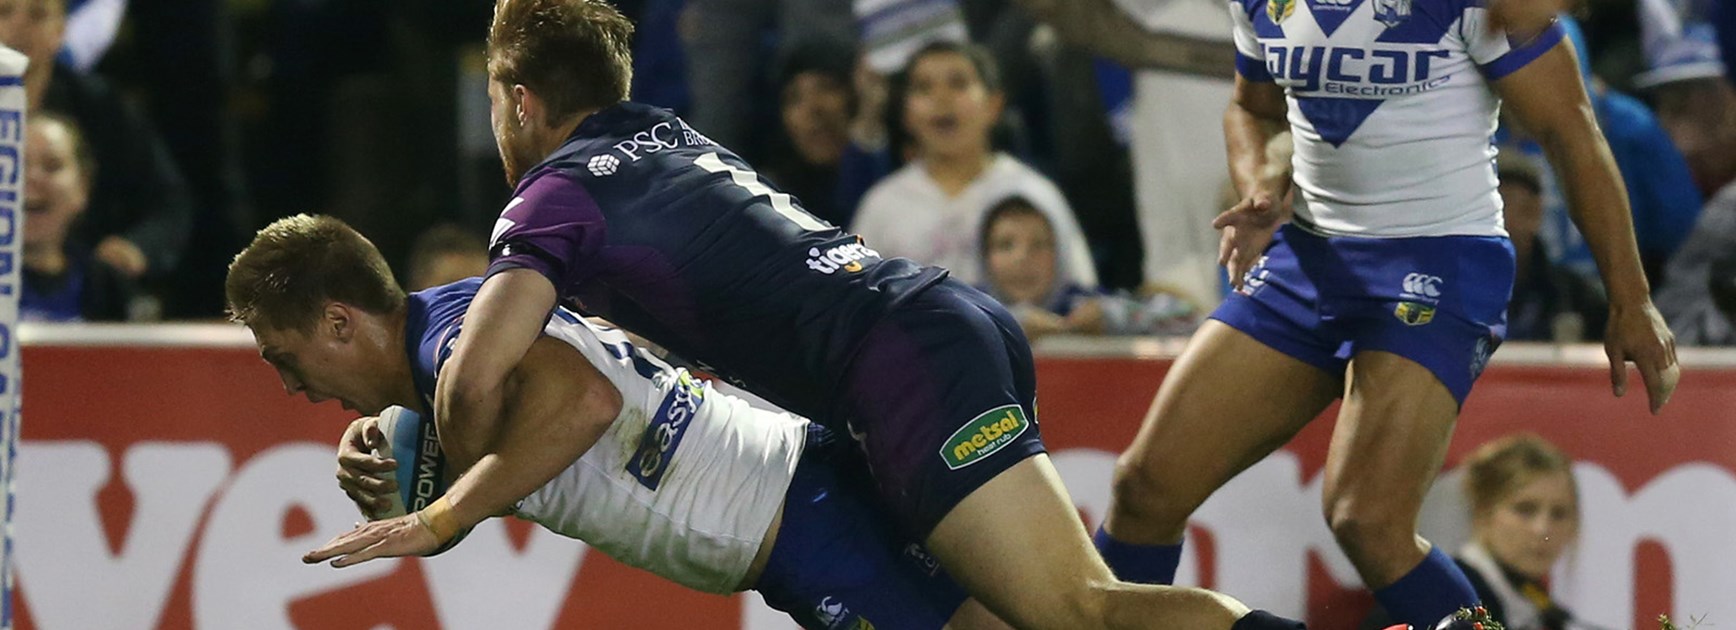 Shaun Lane had a big game against the Storm at Belmore Sports Ground.